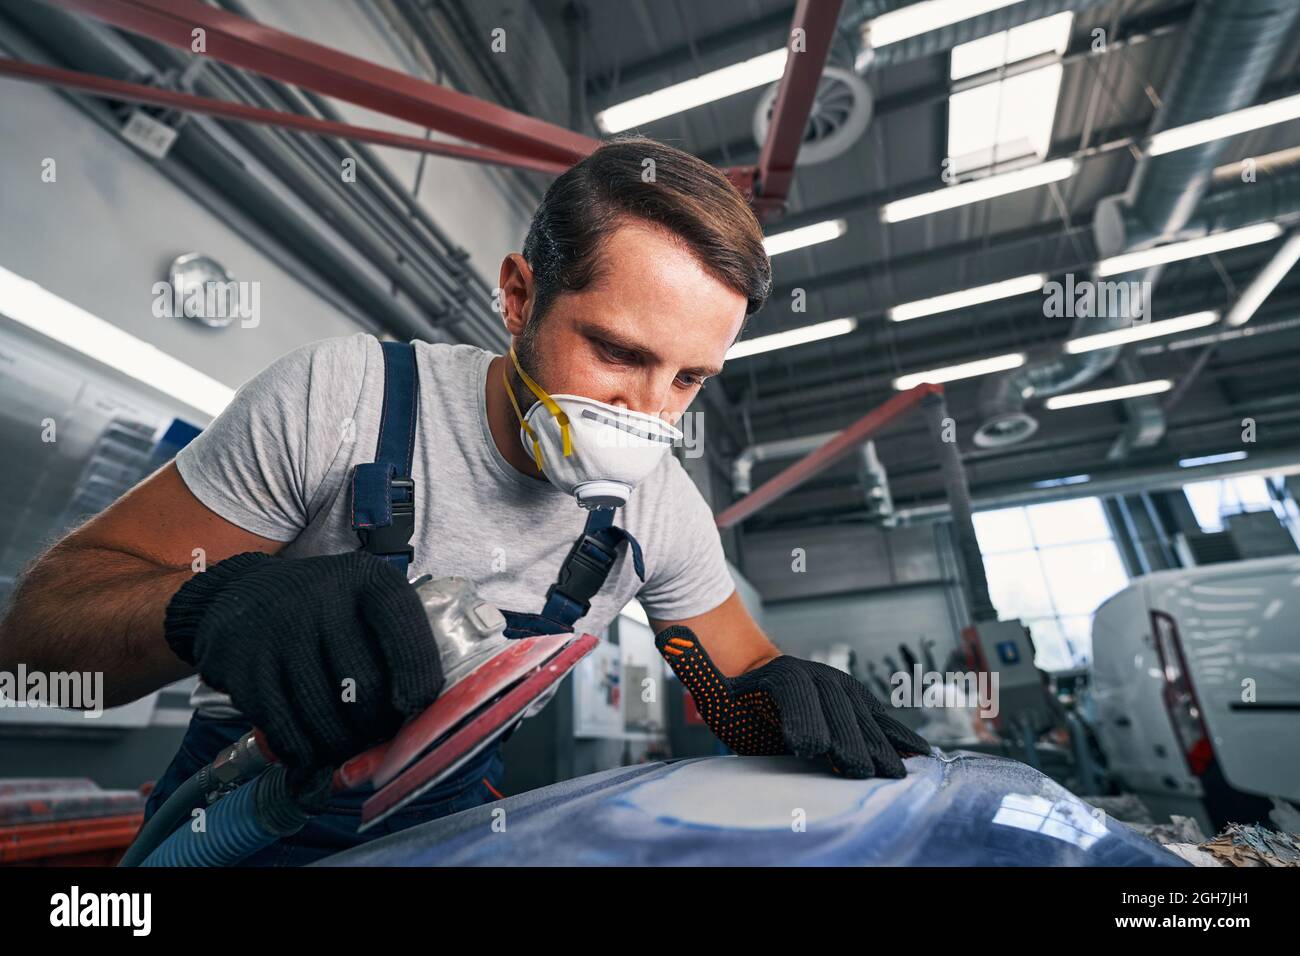 Professional car mechanic looking at grinded surface Stock Photo